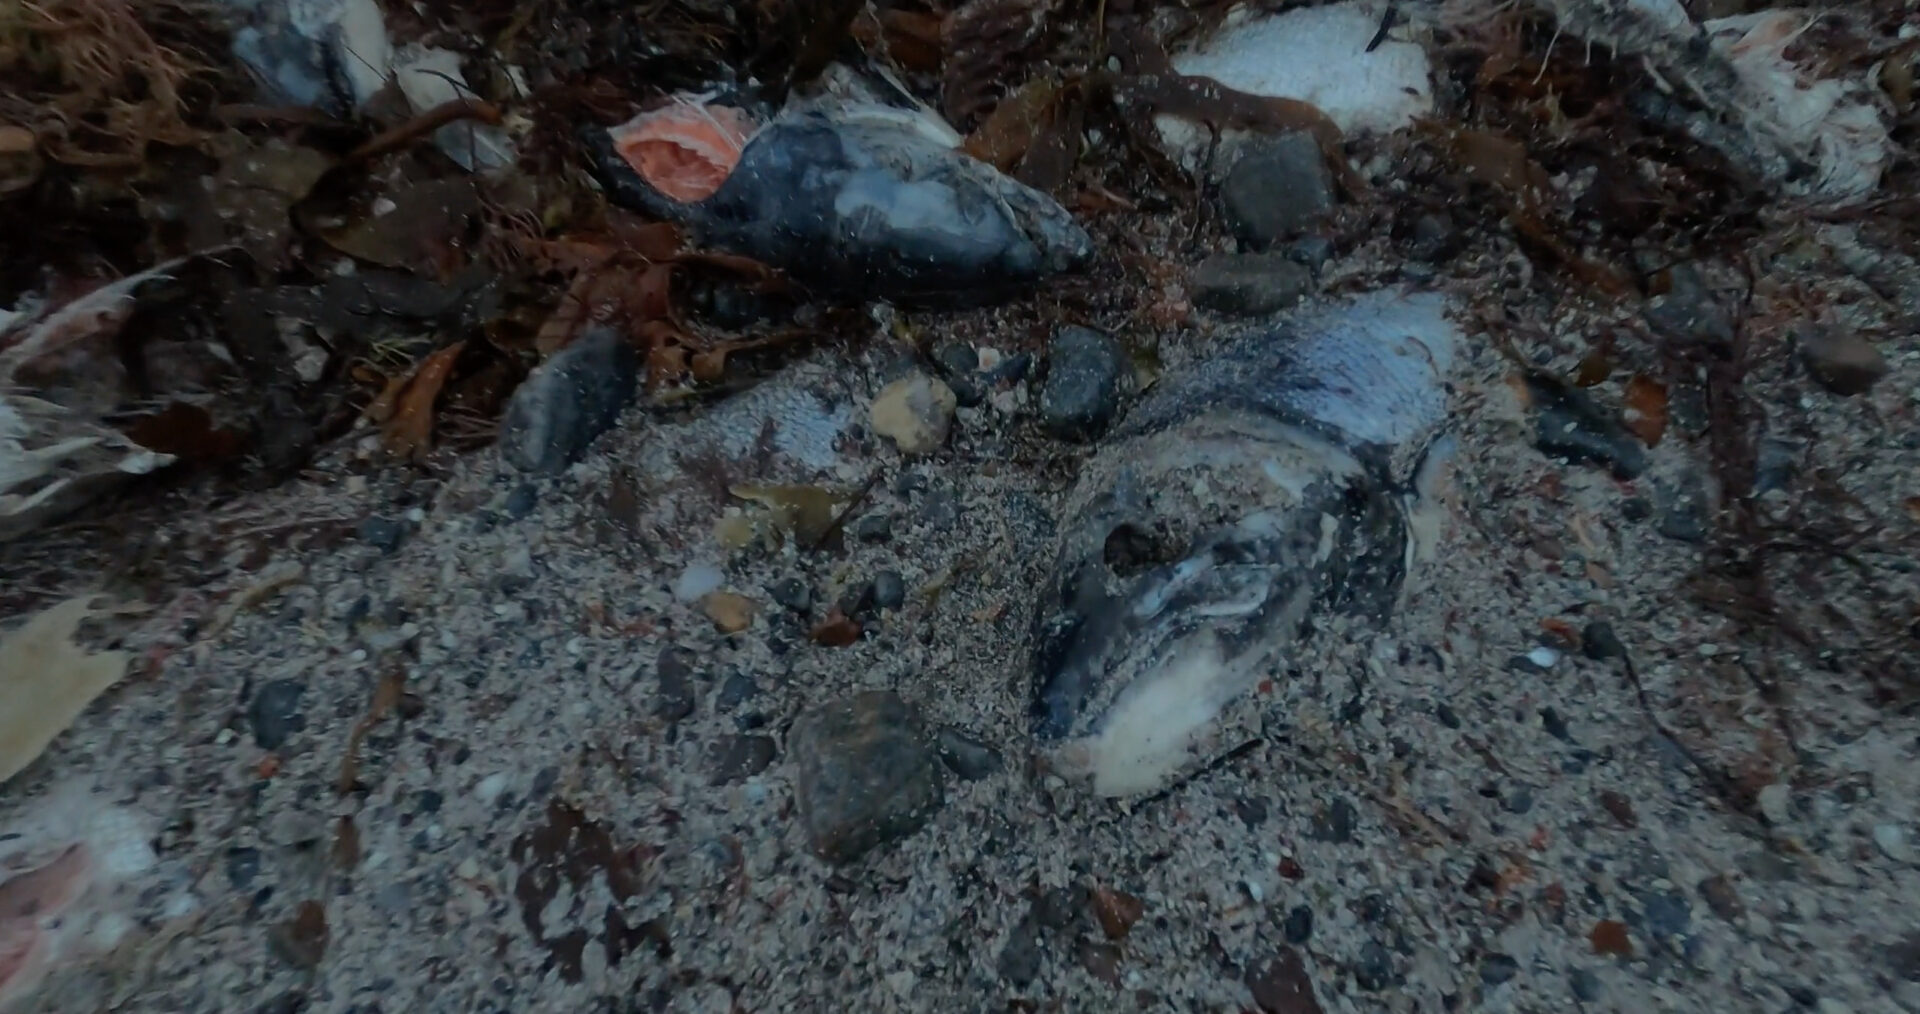 'Illegal' dumping of dead fish in Outer Hebrides continues despite ban vow 5